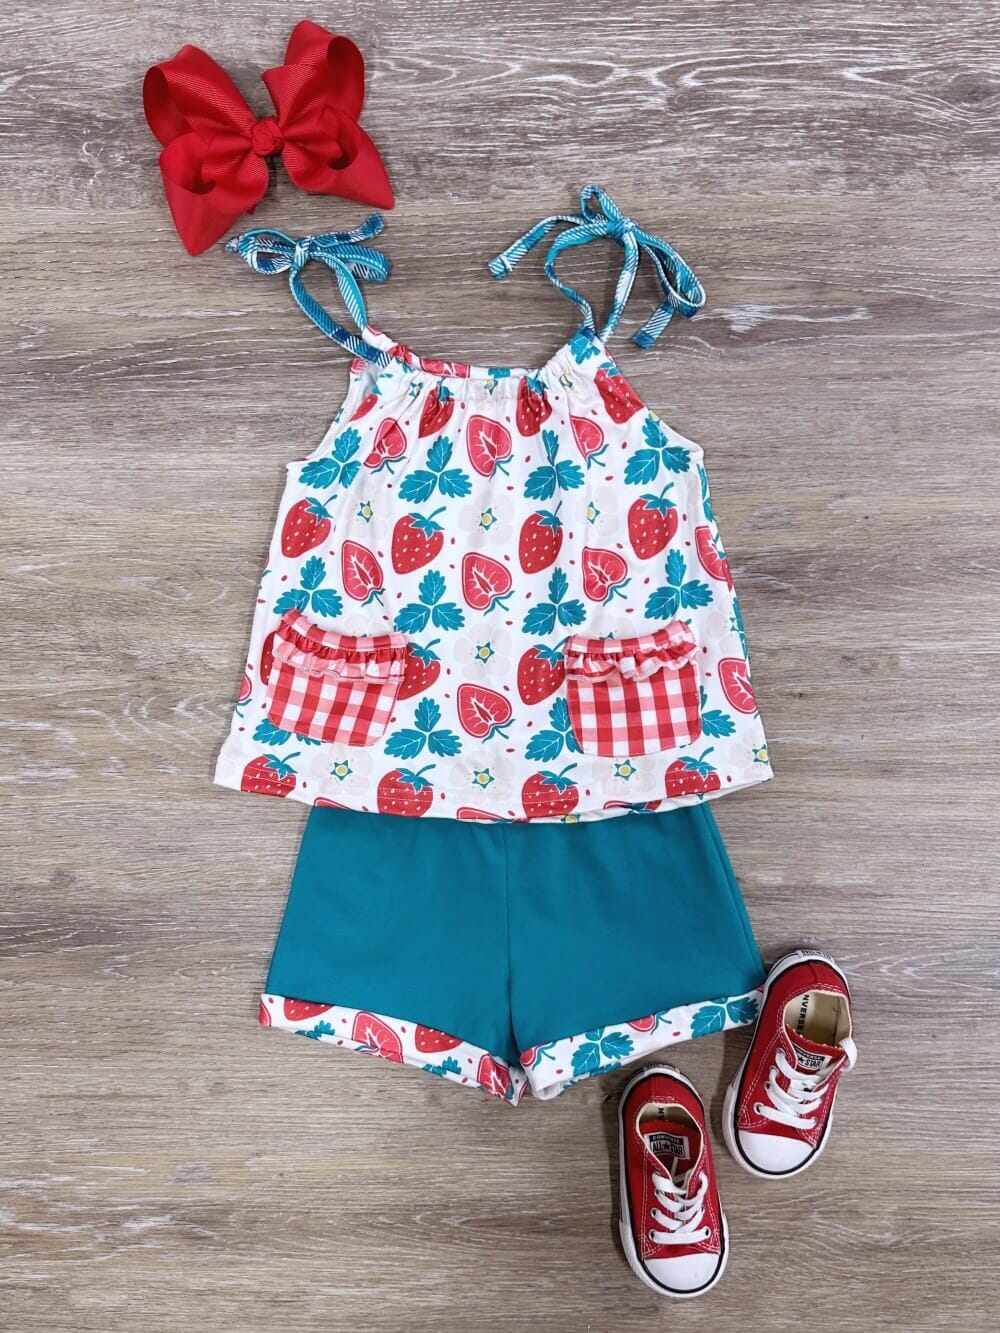 Turquoise & Strawberries Girls Tank Top Shorts Outfit - Sydney So Sweet